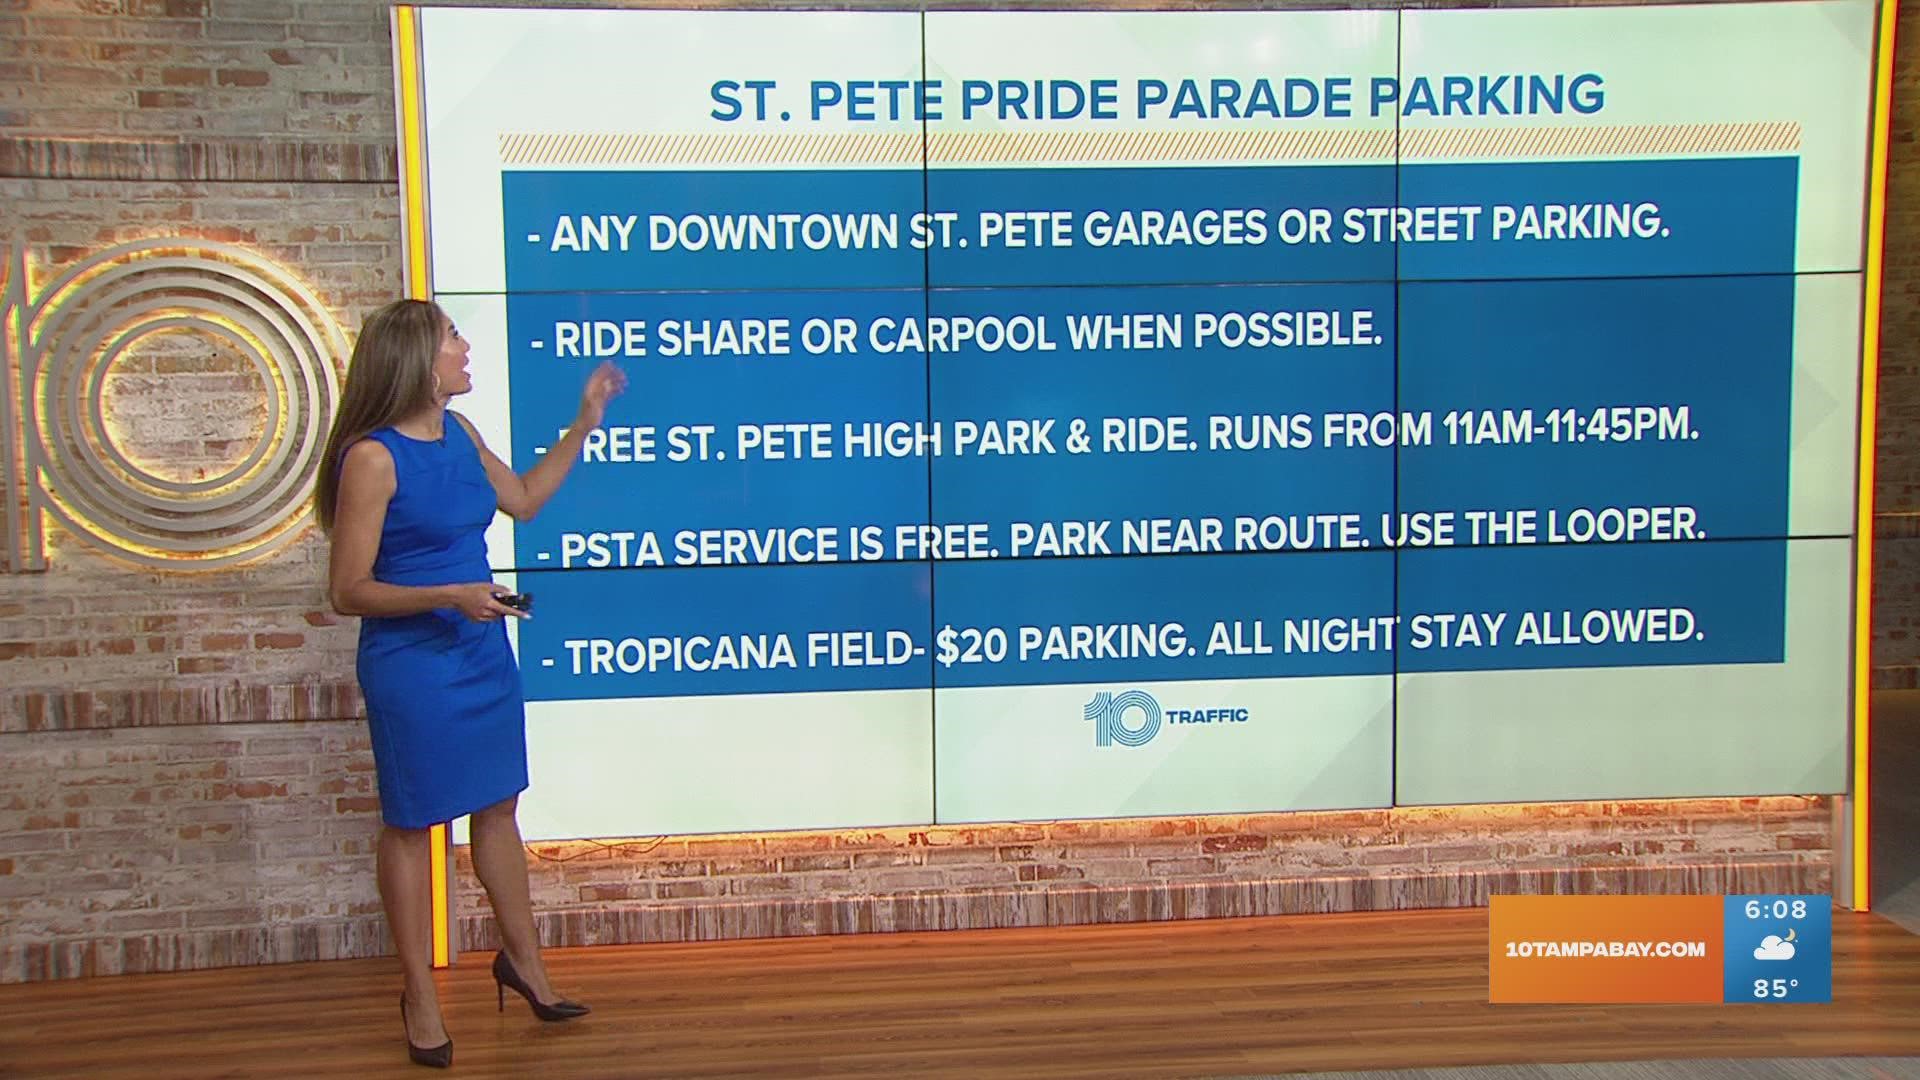 With hundreds of thousands of people expected to celebrate Pride in St. Pete, it's important to know where you can park.